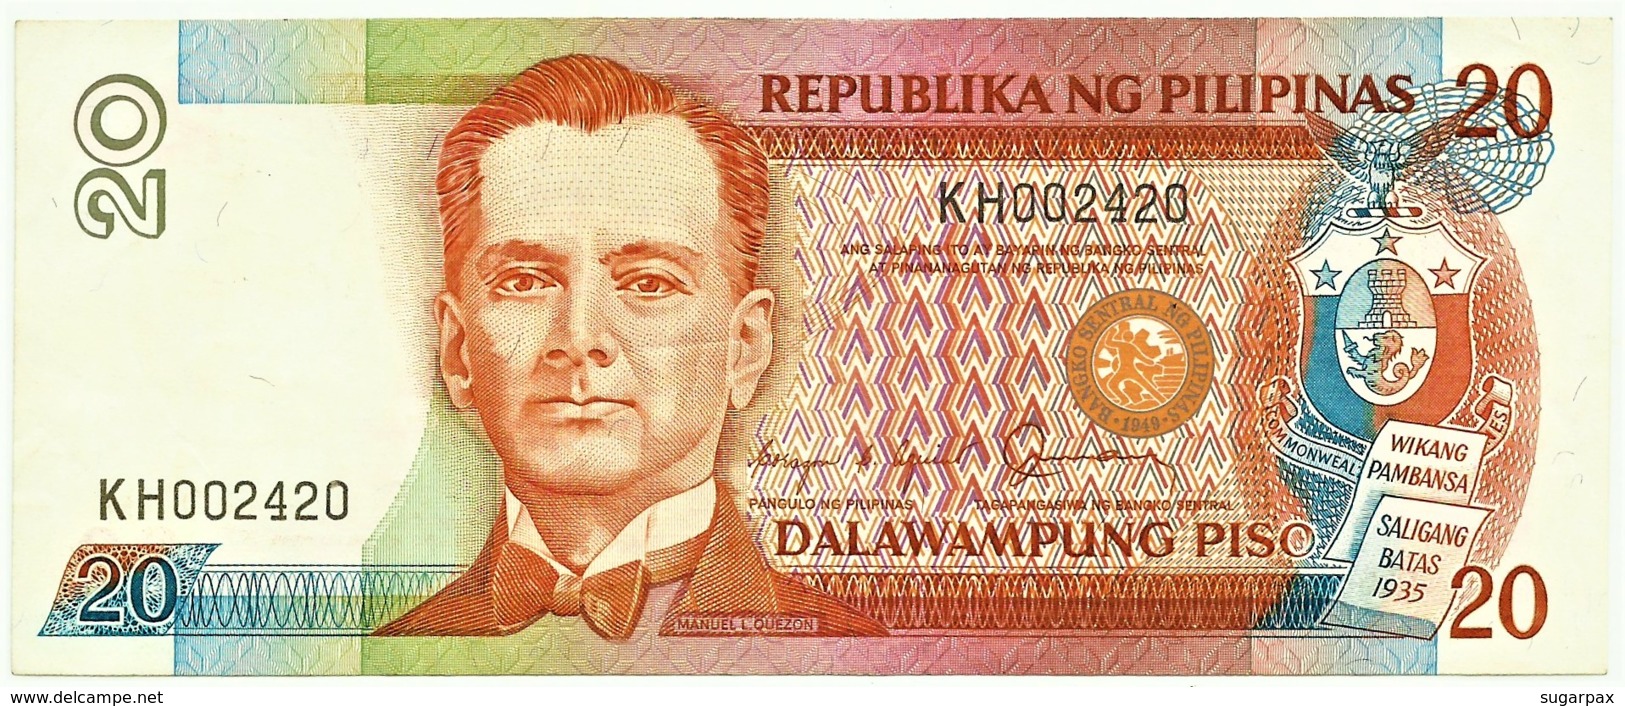 PHILIPPINES - 20 Piso - ND ( 1986 - 94 ) Pick 170.b - BLACK Serial # - Sign. 11 Serie KH Seal Type 4 - Manuel L. Quezon - Philippines